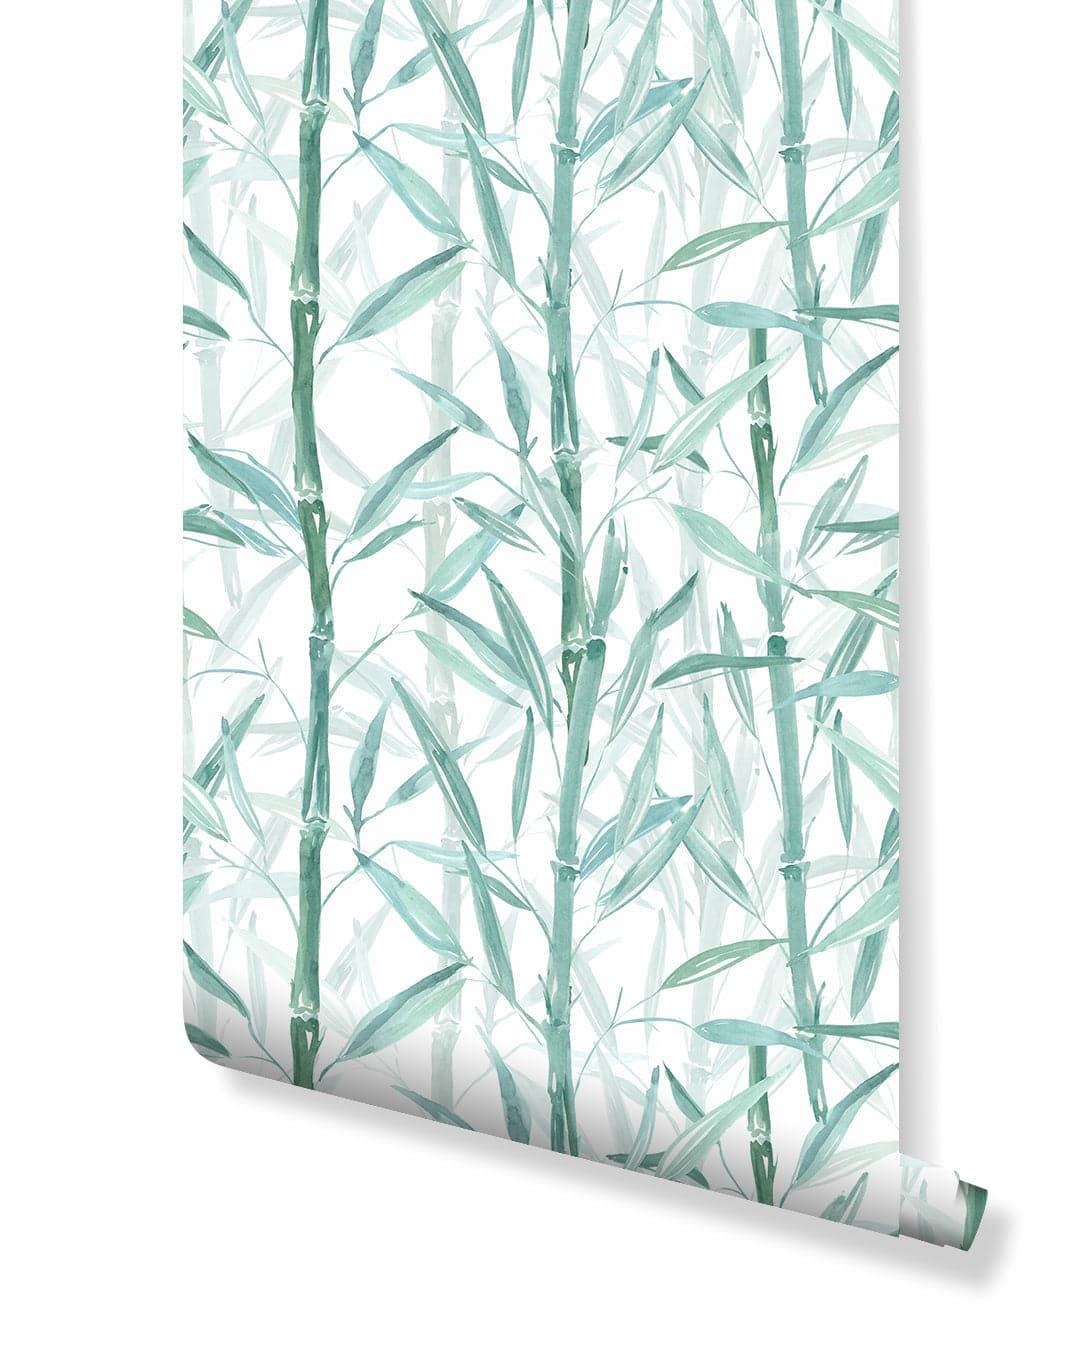 Watercolor Green Bamboo Removable Wallpaper Watercolor Green Bamboo Removable Wallpaper Watercolor Green Bamboo Removable Wallpaper 